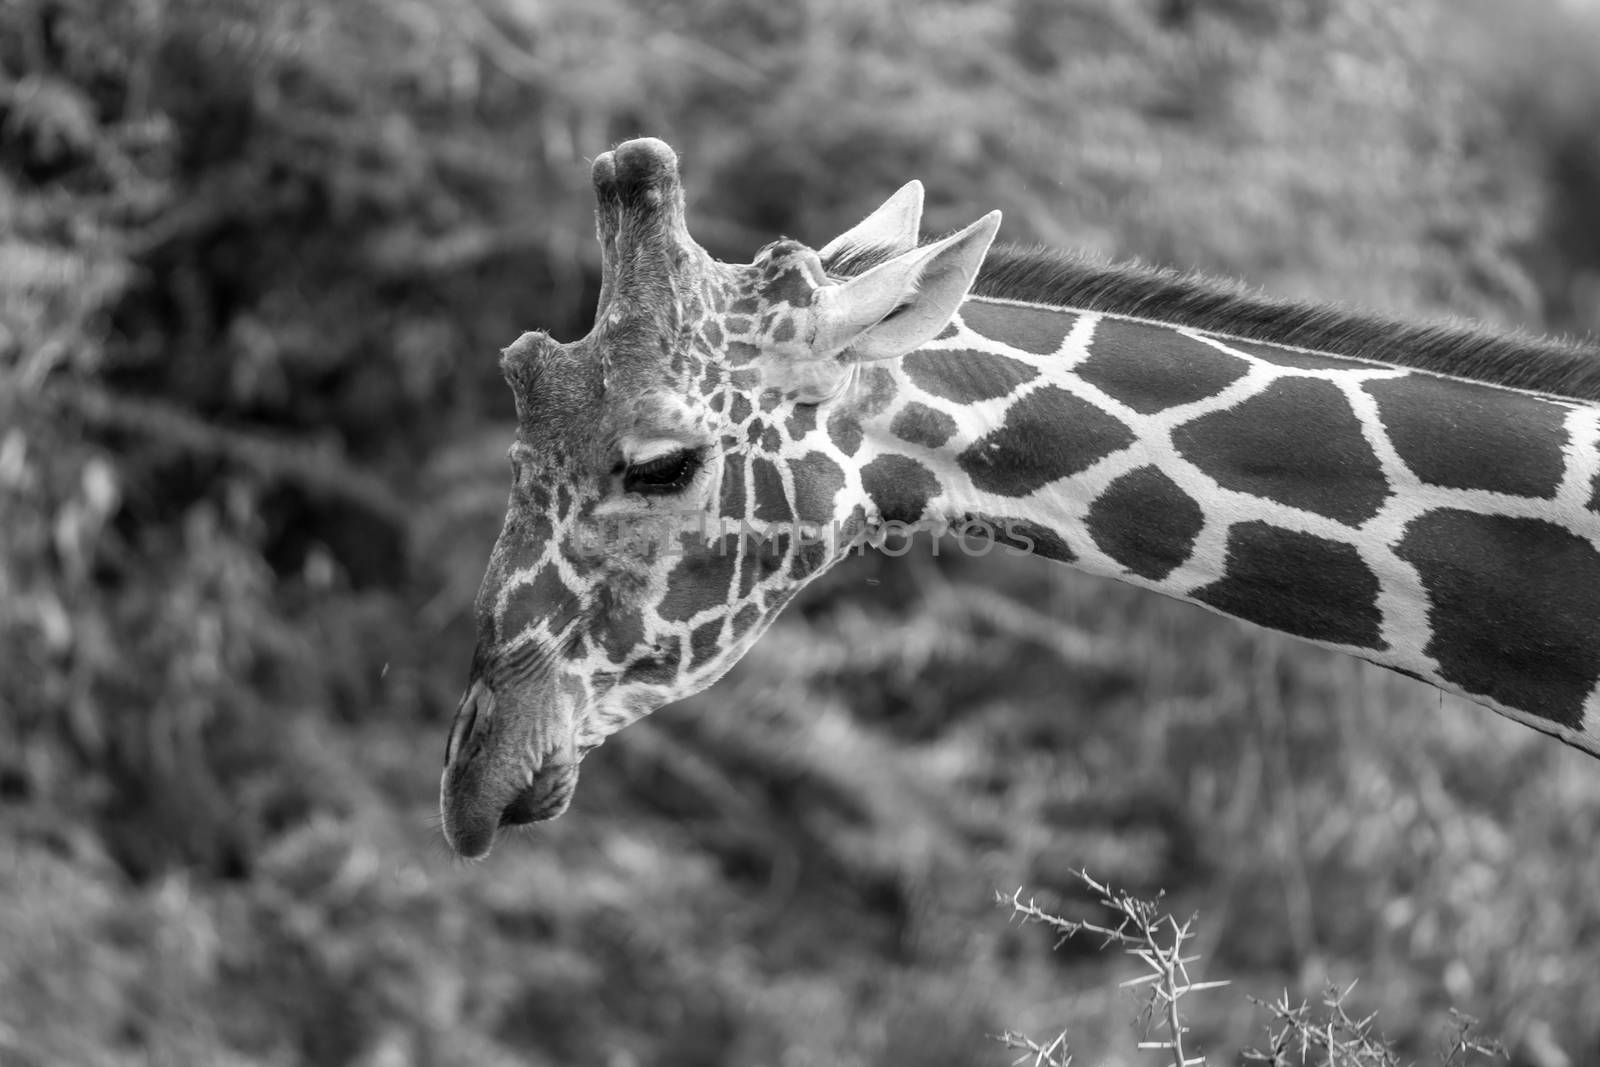 The face of a giraffe in close-up by 25ehaag6